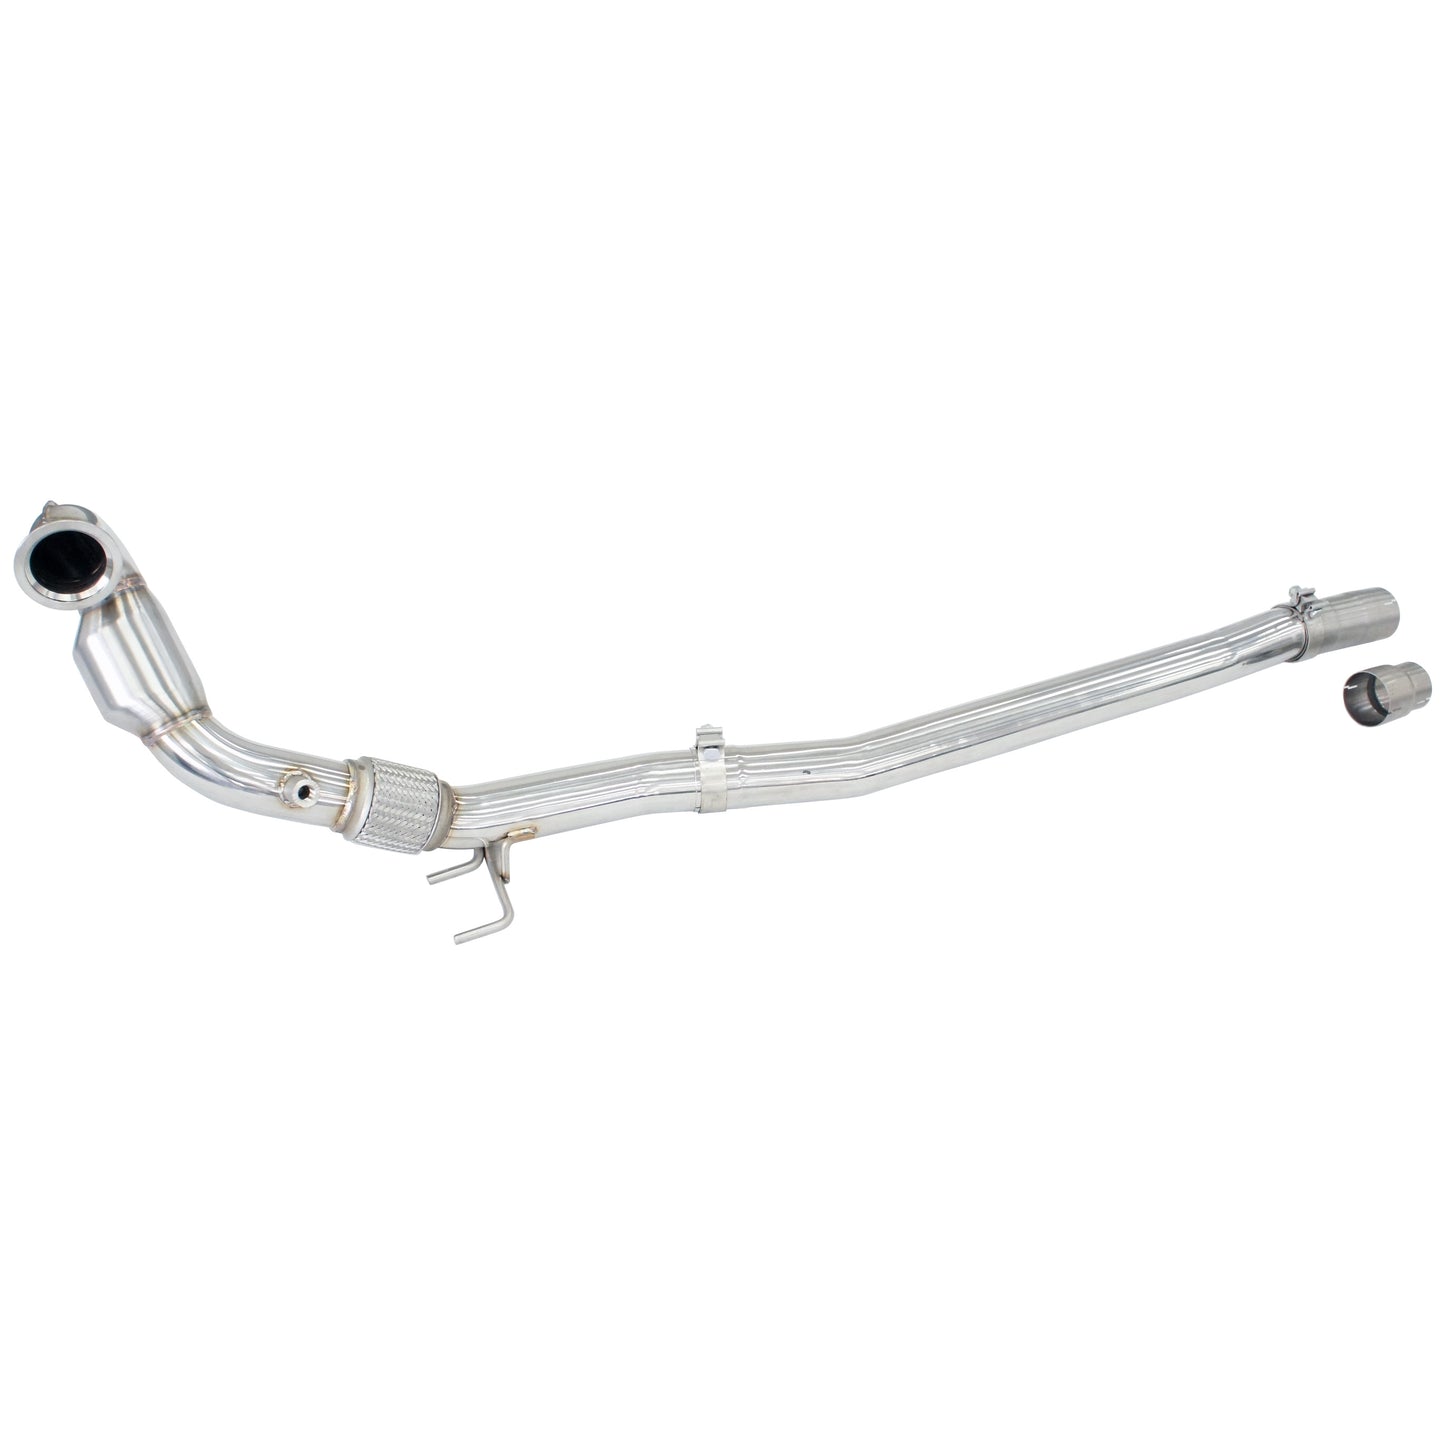 Q300 Valved Turbo Back Exhaust w/Oval Tips - VW Golf R Mk7